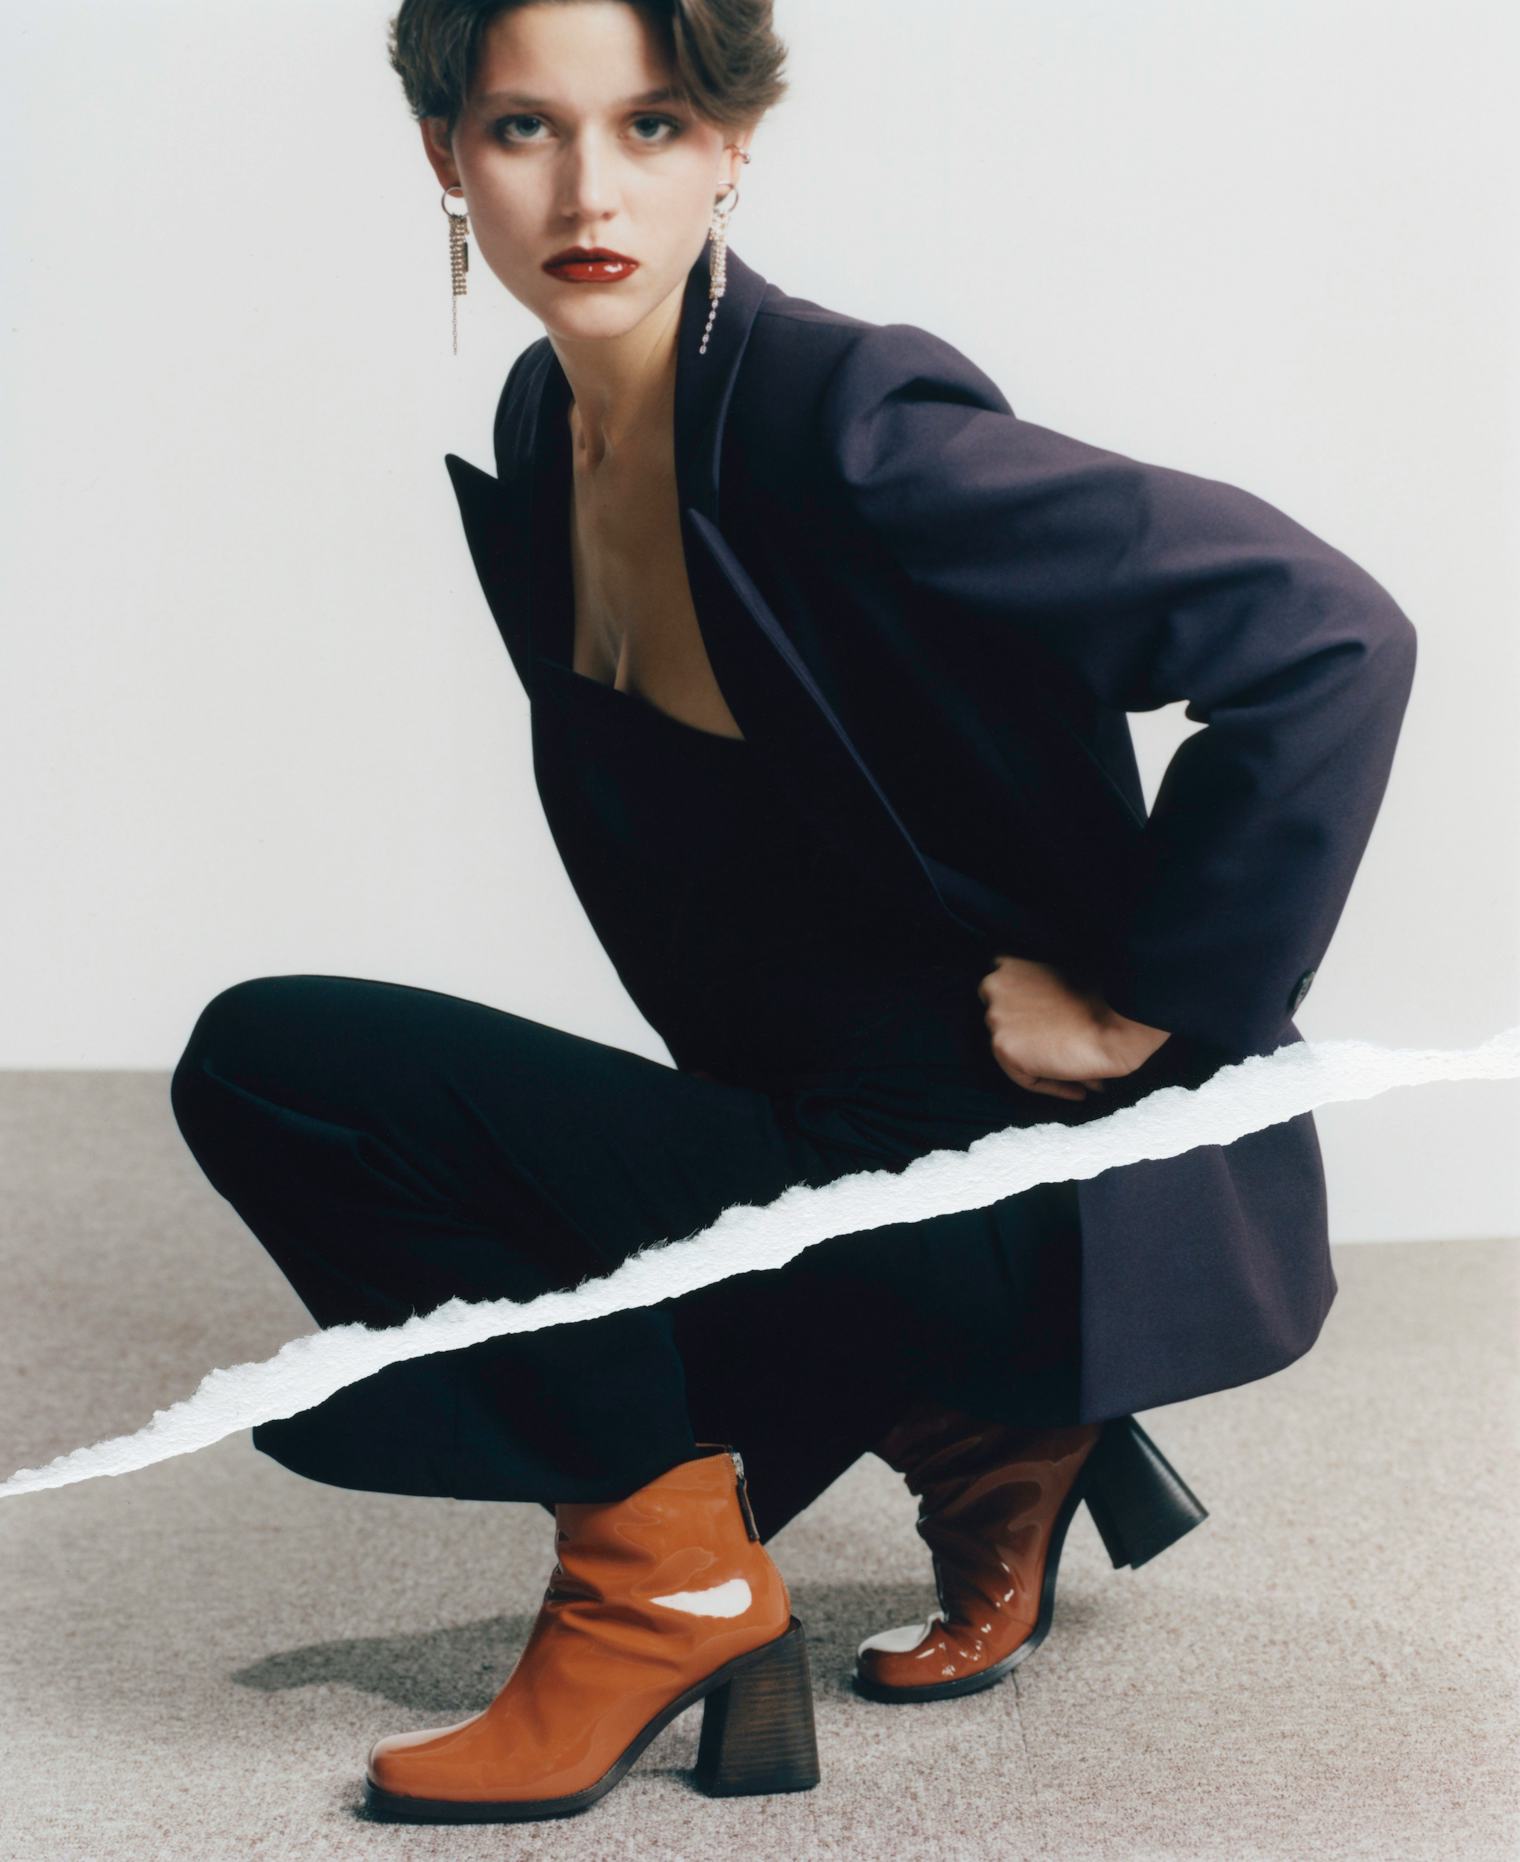 Justine Clenquet's Debut Footwear Collection Is An ‘80s Dream